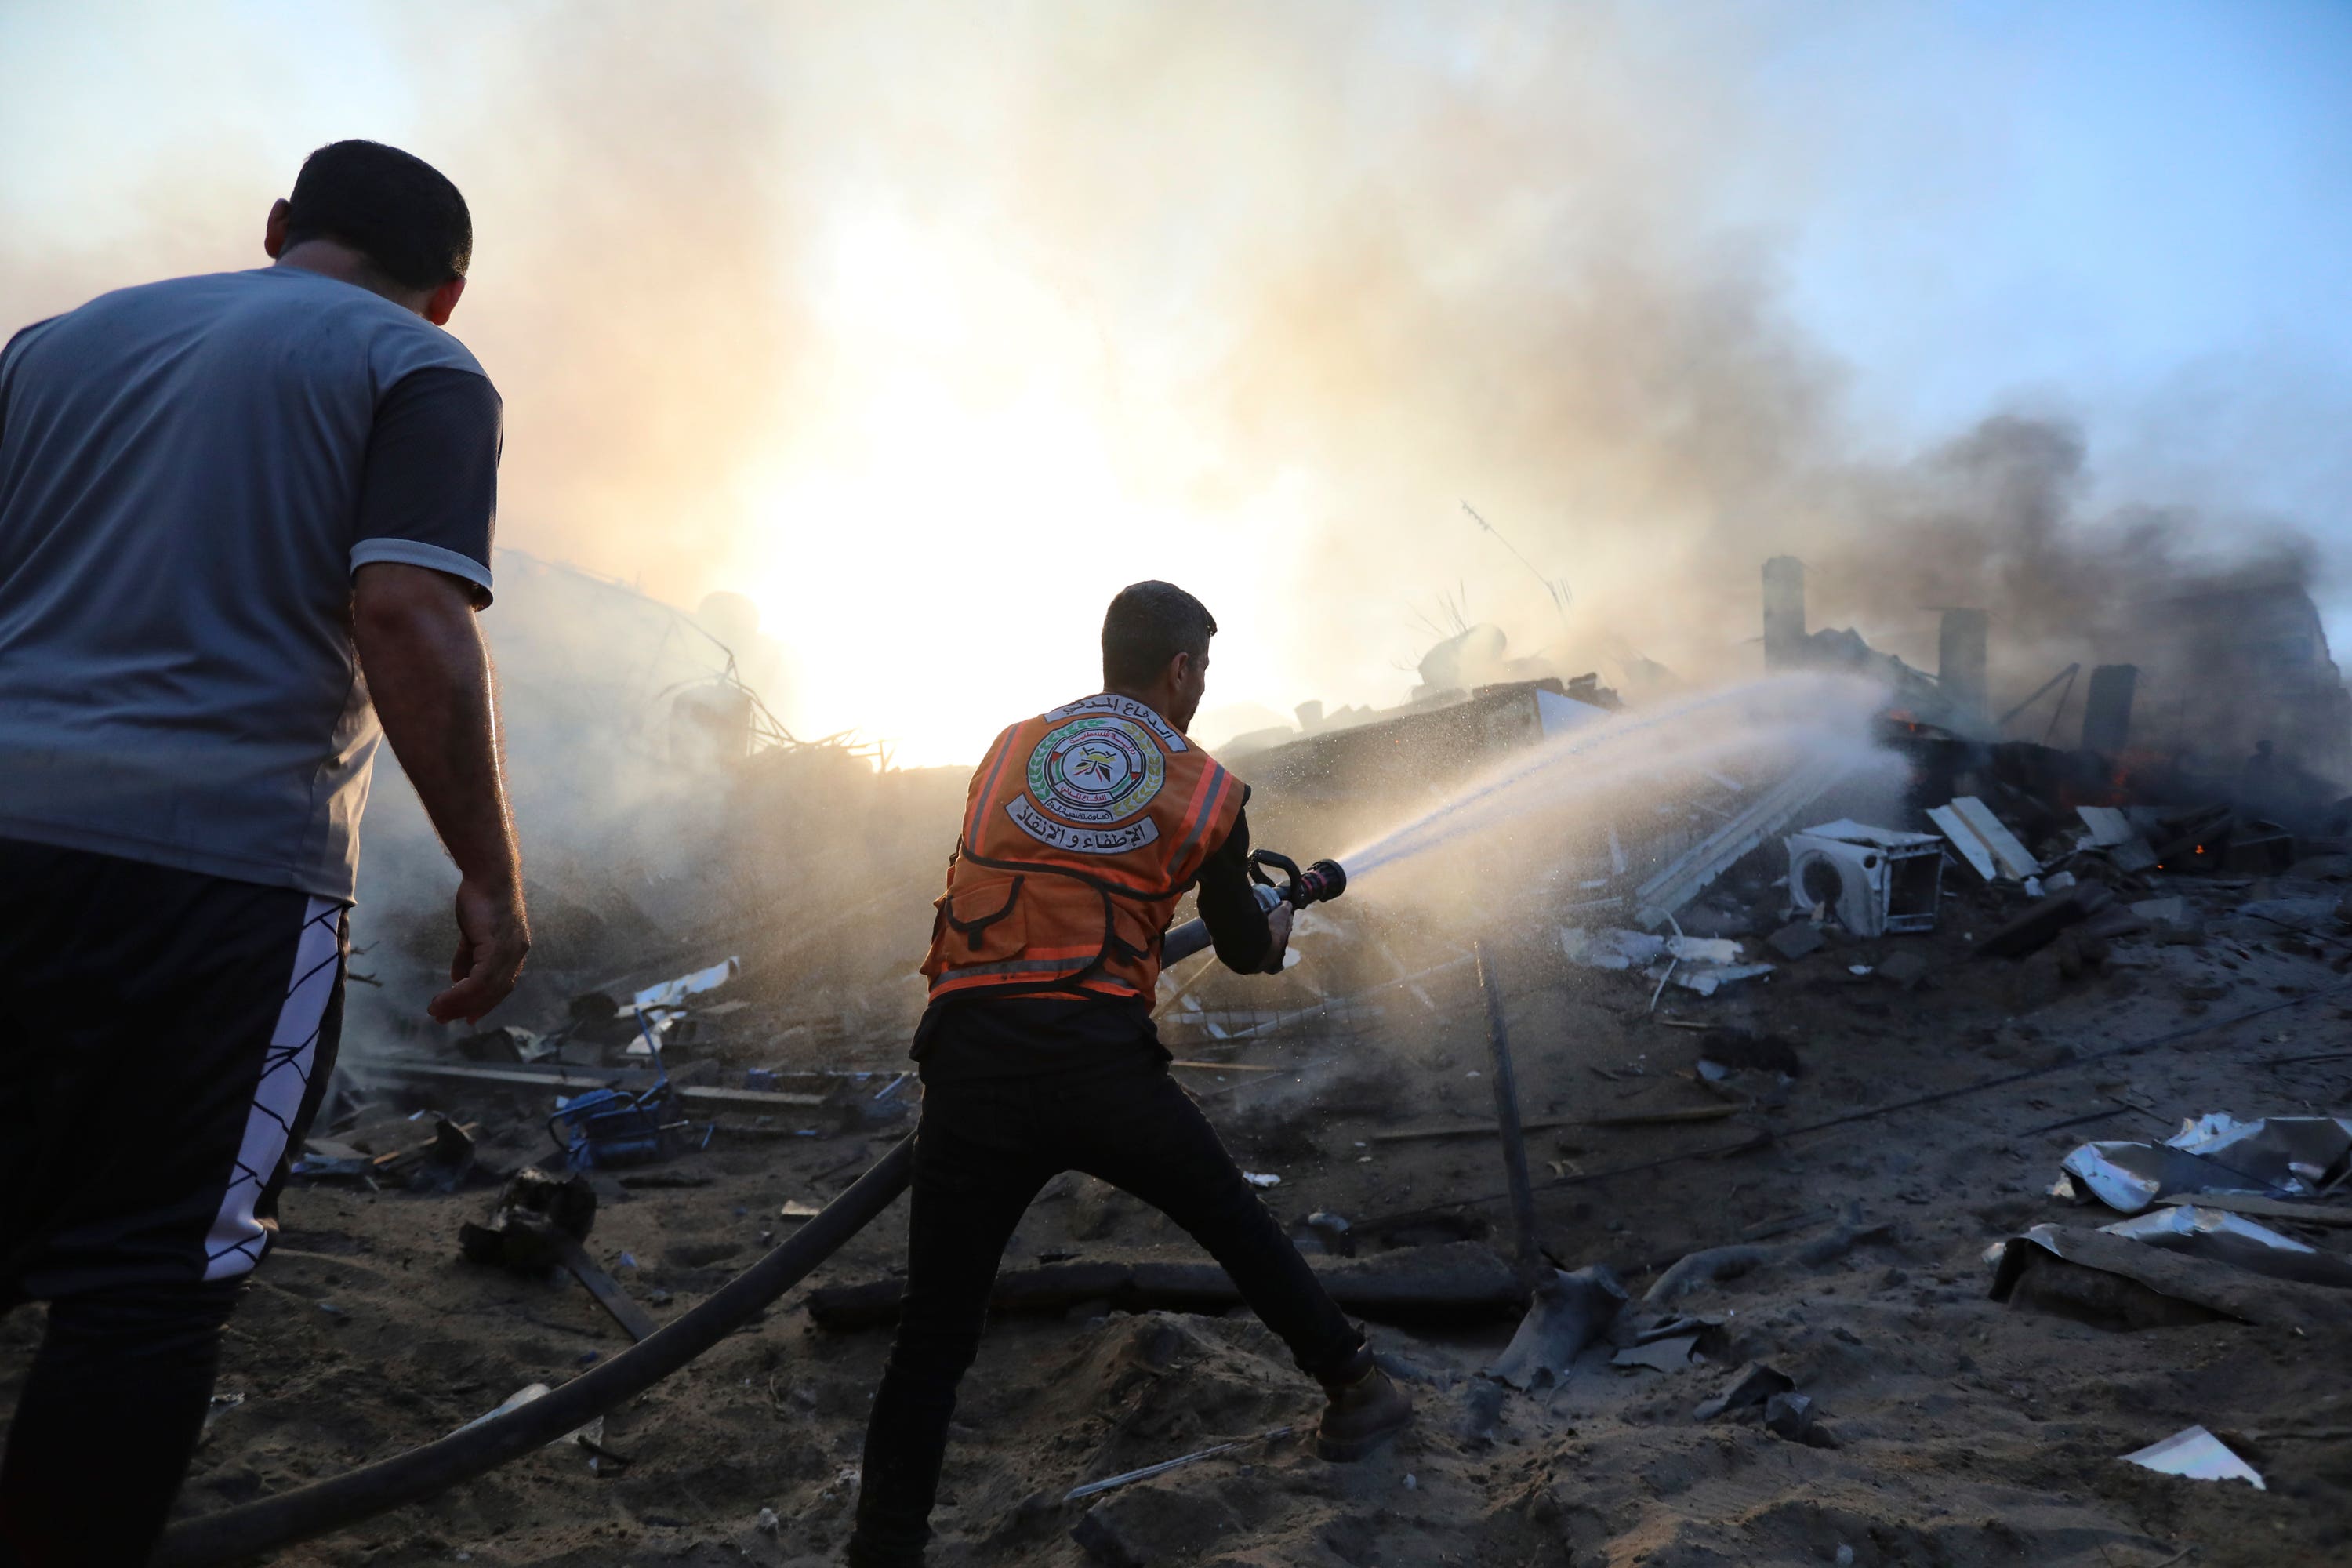 A Palestinian firefighter extinguishes a fire in a destroyed building following Israeli airstrikes on Gaza City.